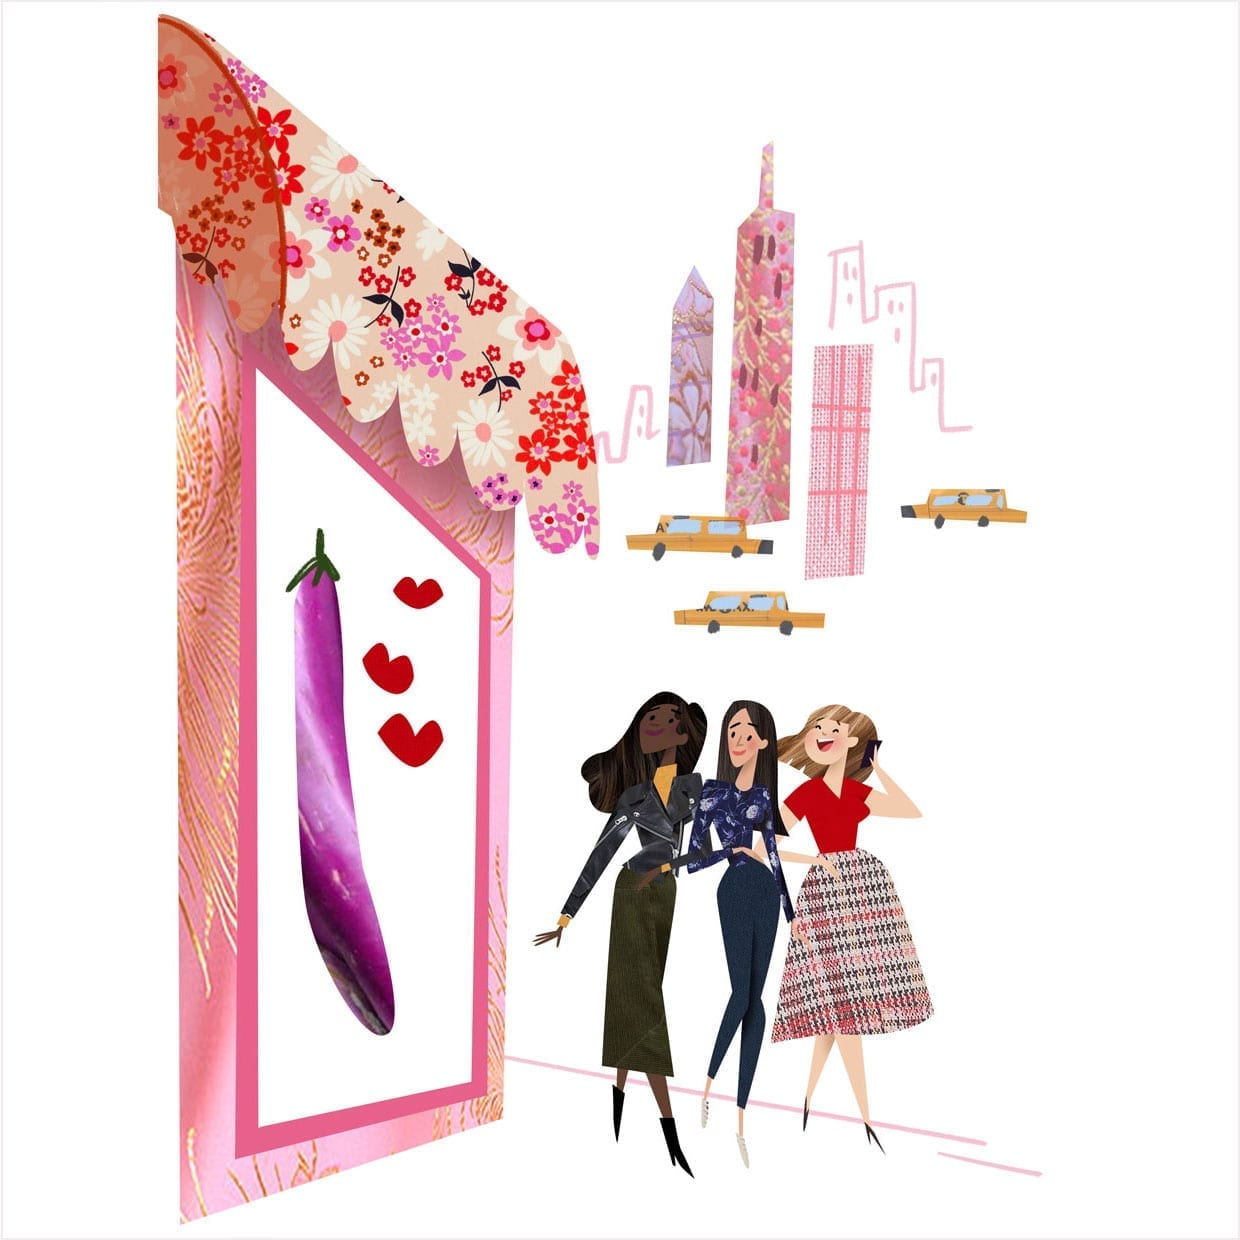 An illustration of three women walking by a store with an eggplant emoji and three hearts in the display window with the New York City skyline and yellow cabs behind them.